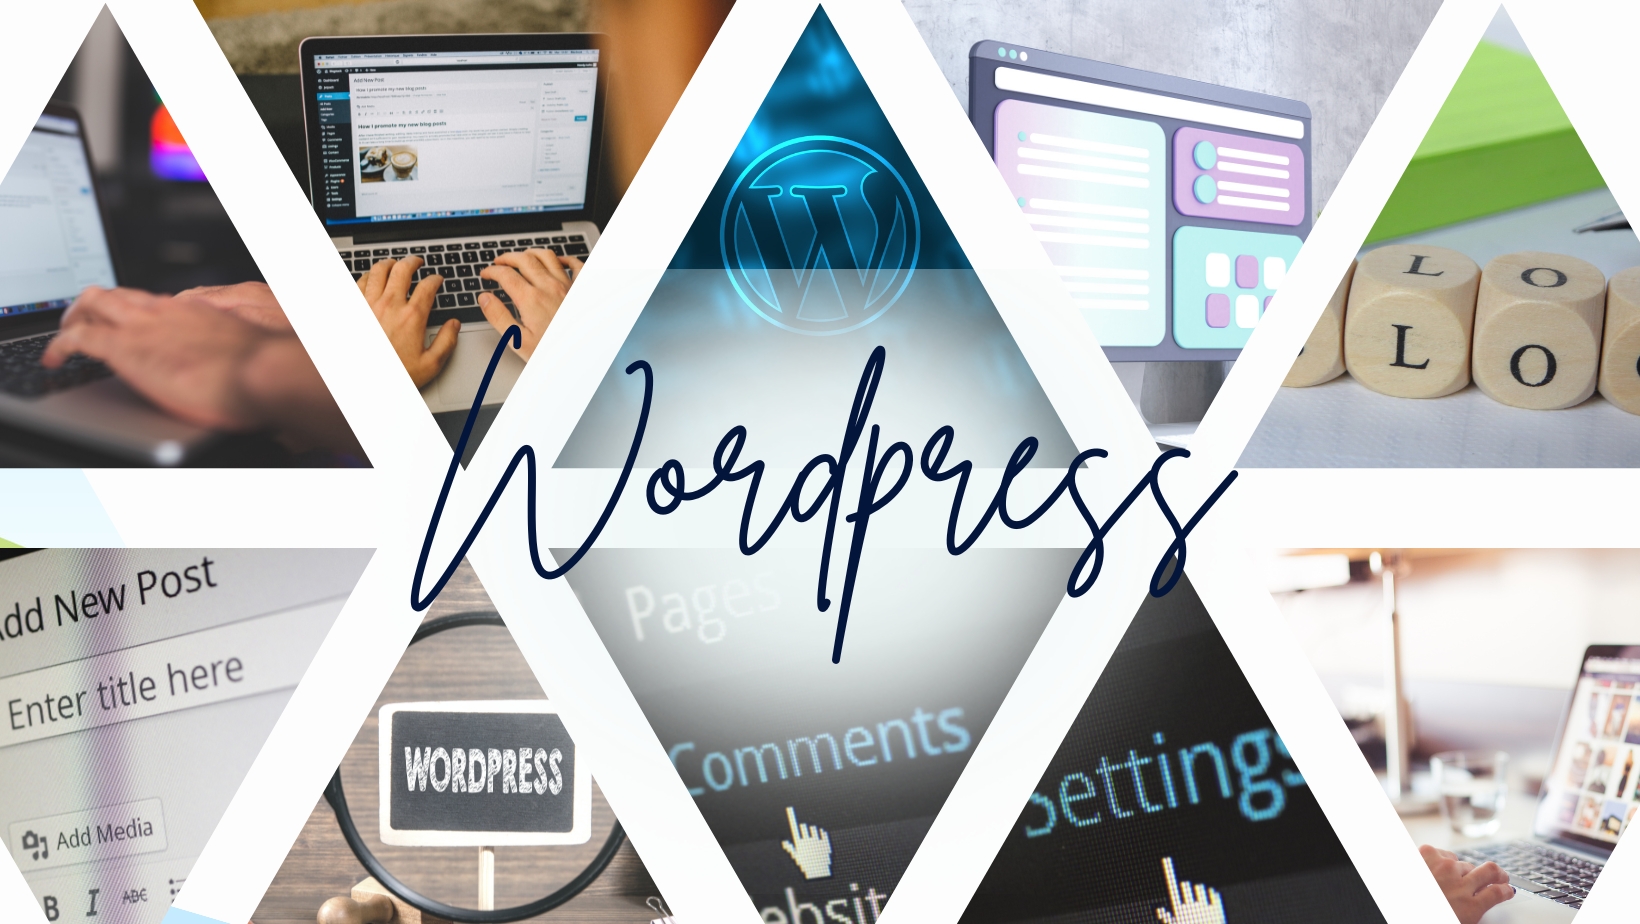 6 Reasons why Small Businesses Should Choose Wordpress with Woocommerce for Their Online Store